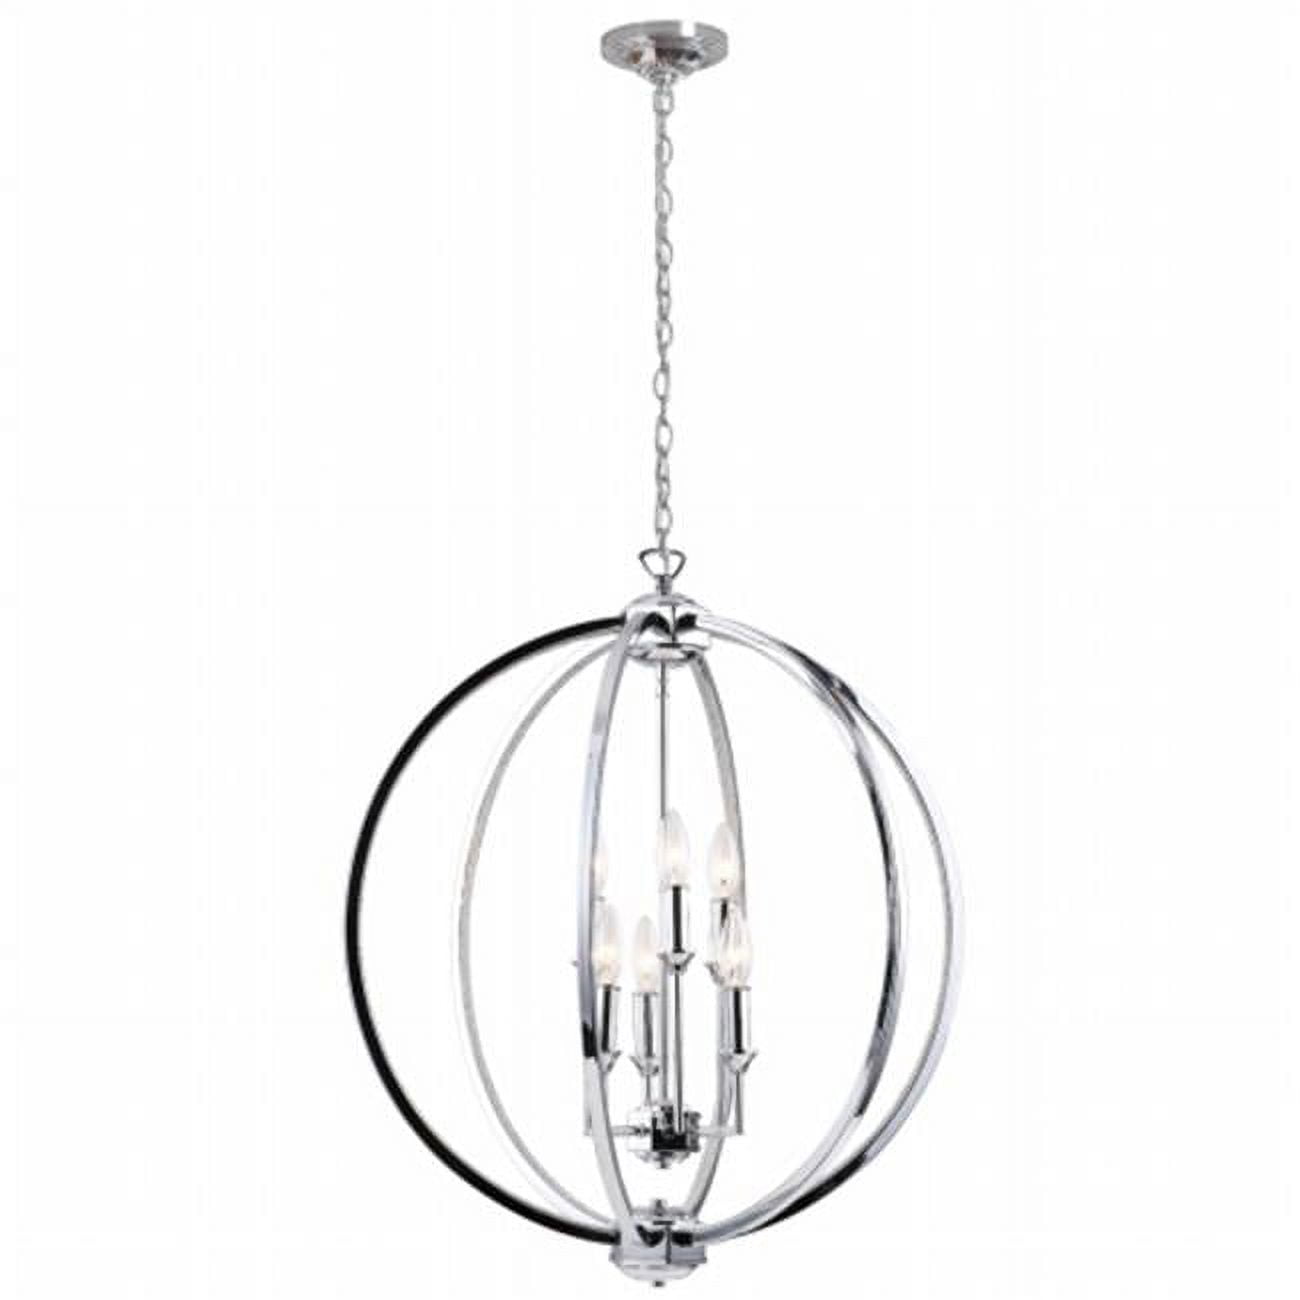 6 Light 24 In. Chandelier With Crystal Studded Banding, Polished Chrome